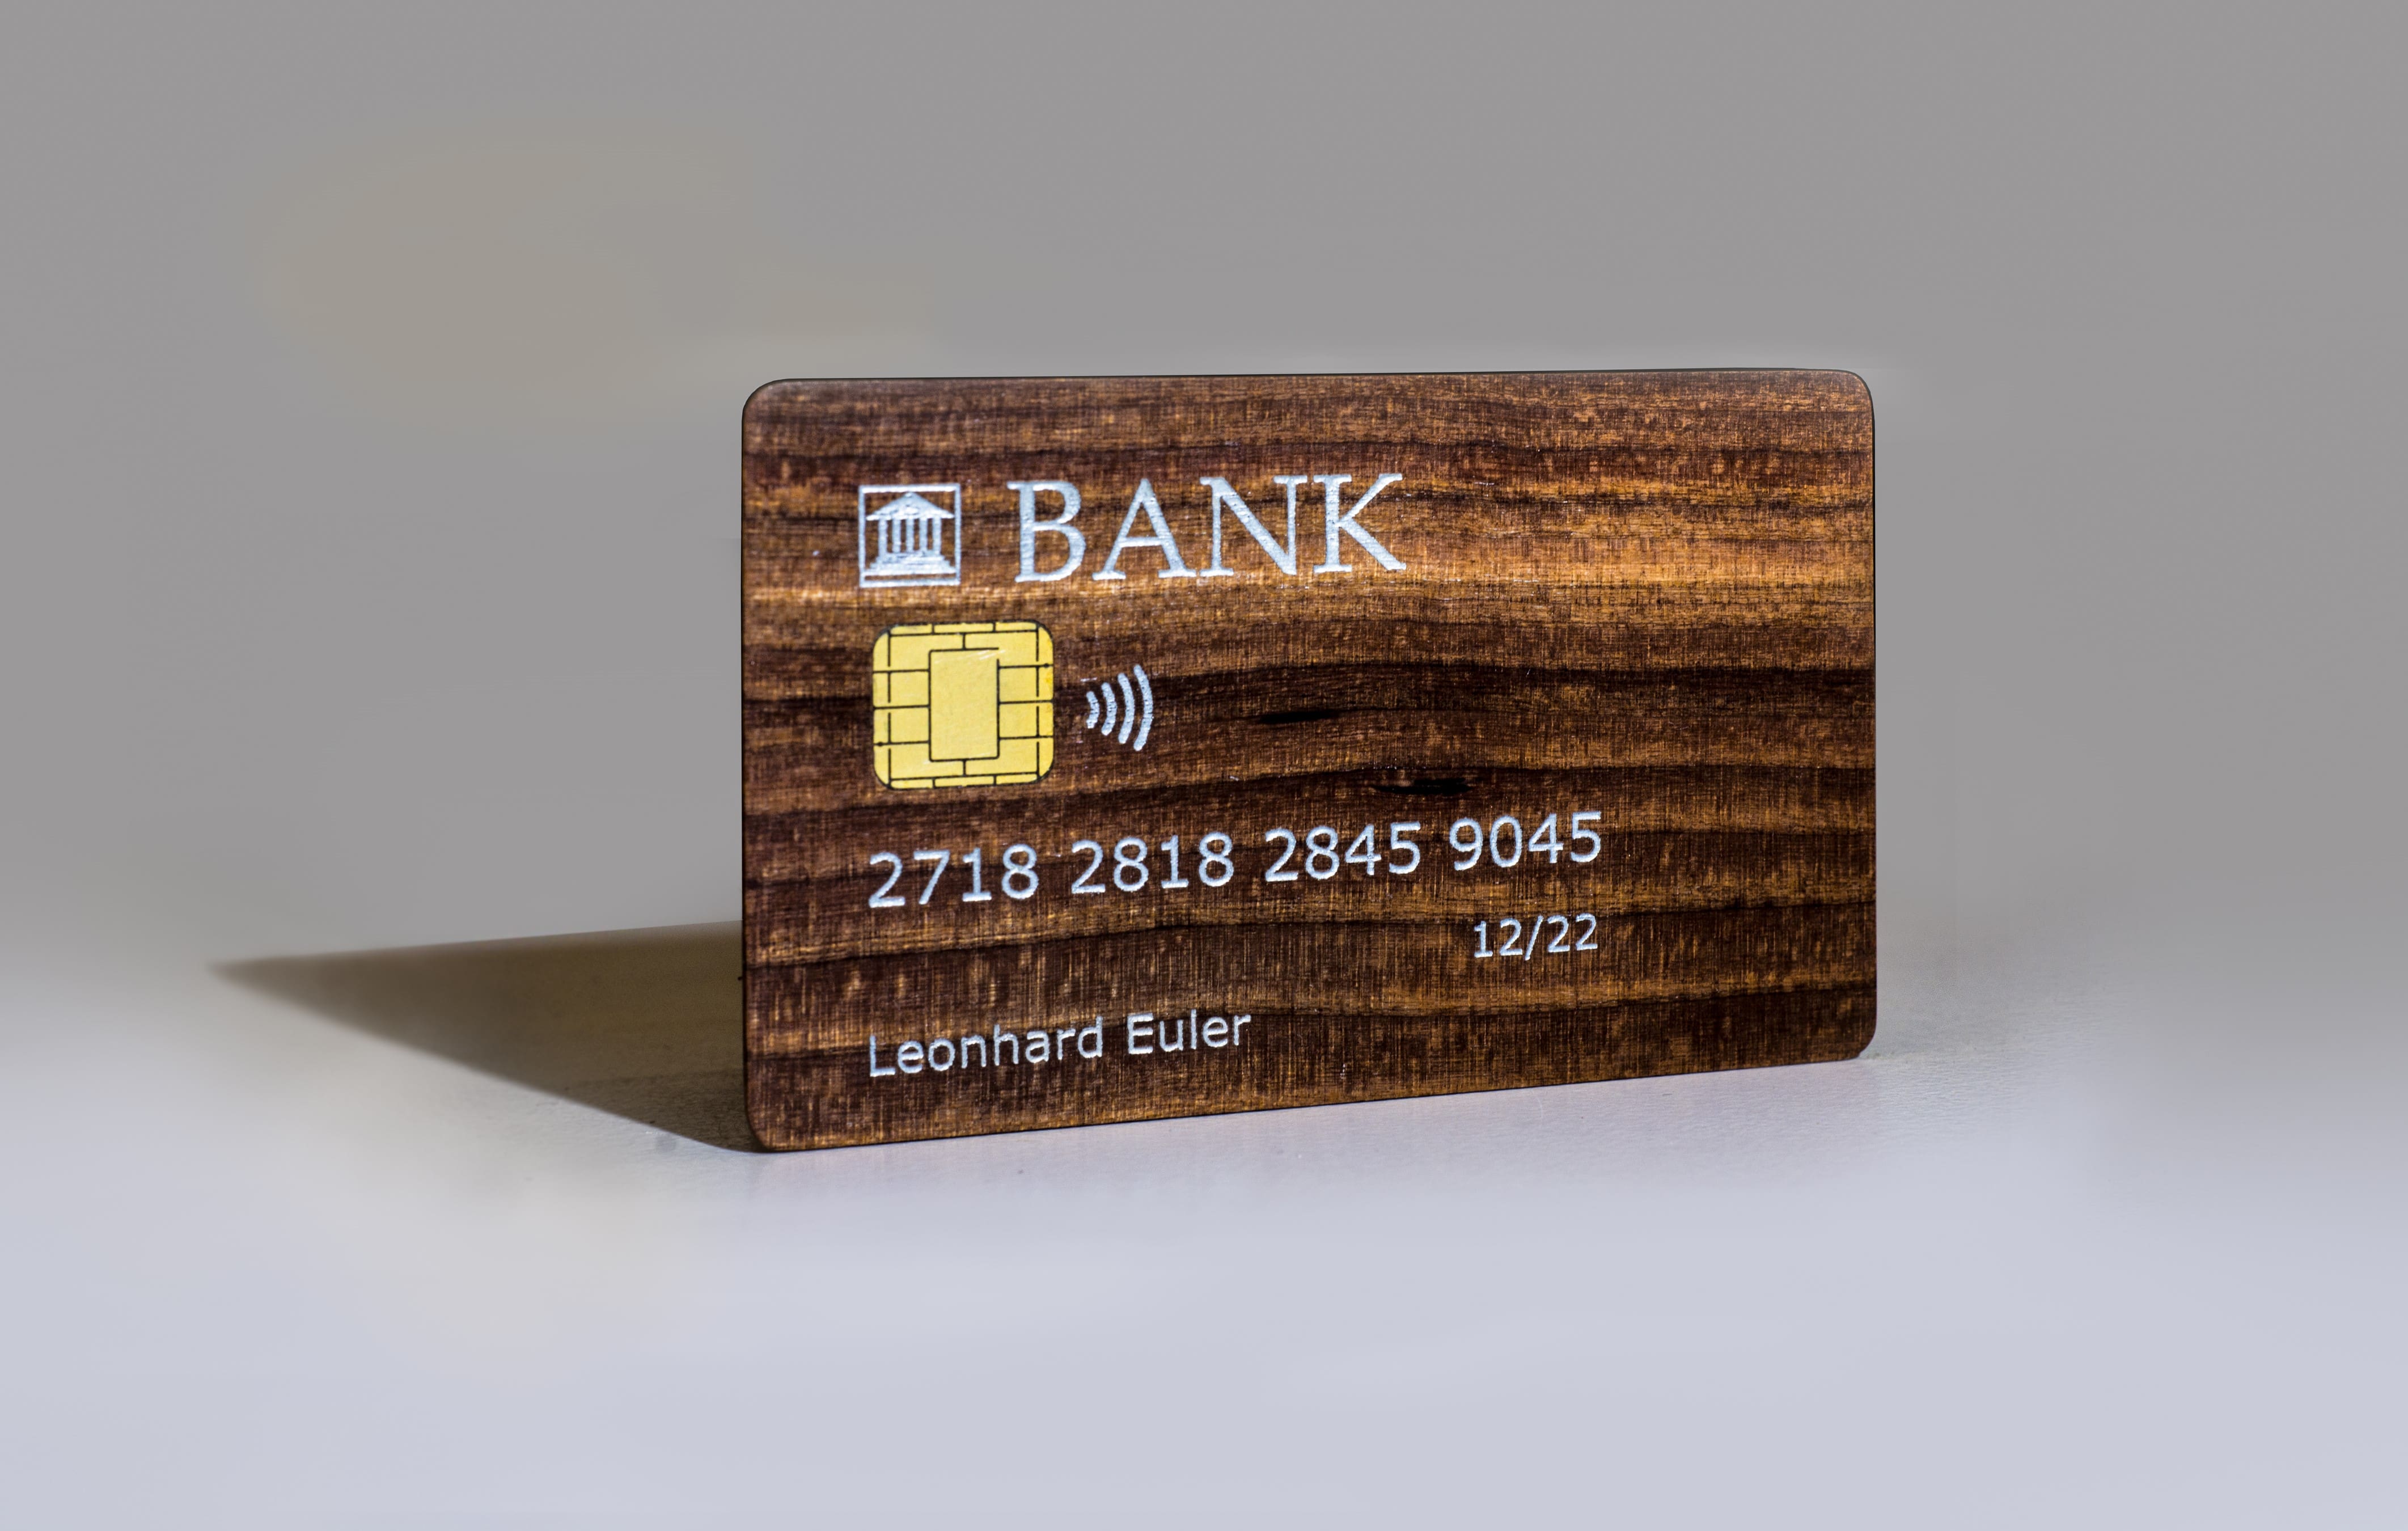 Chip card made of cherry wood, with contactless payment feature